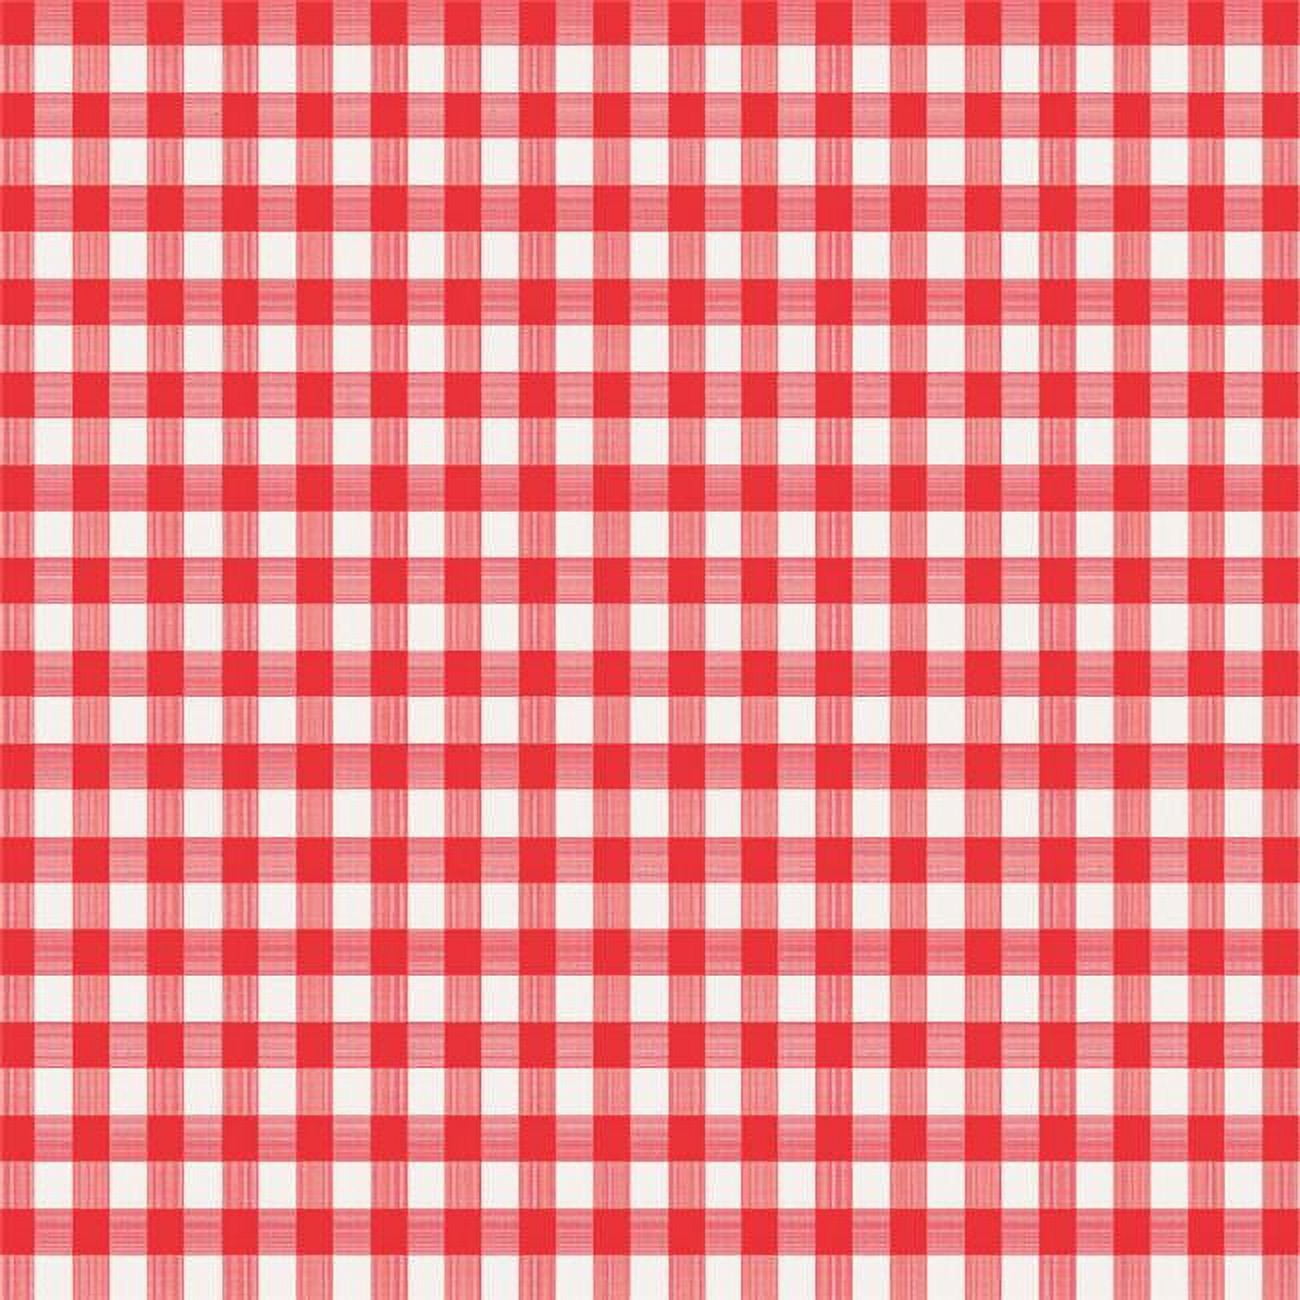 Menu 52 x 52 in. Red & White Checkered Plastic Tablecloth